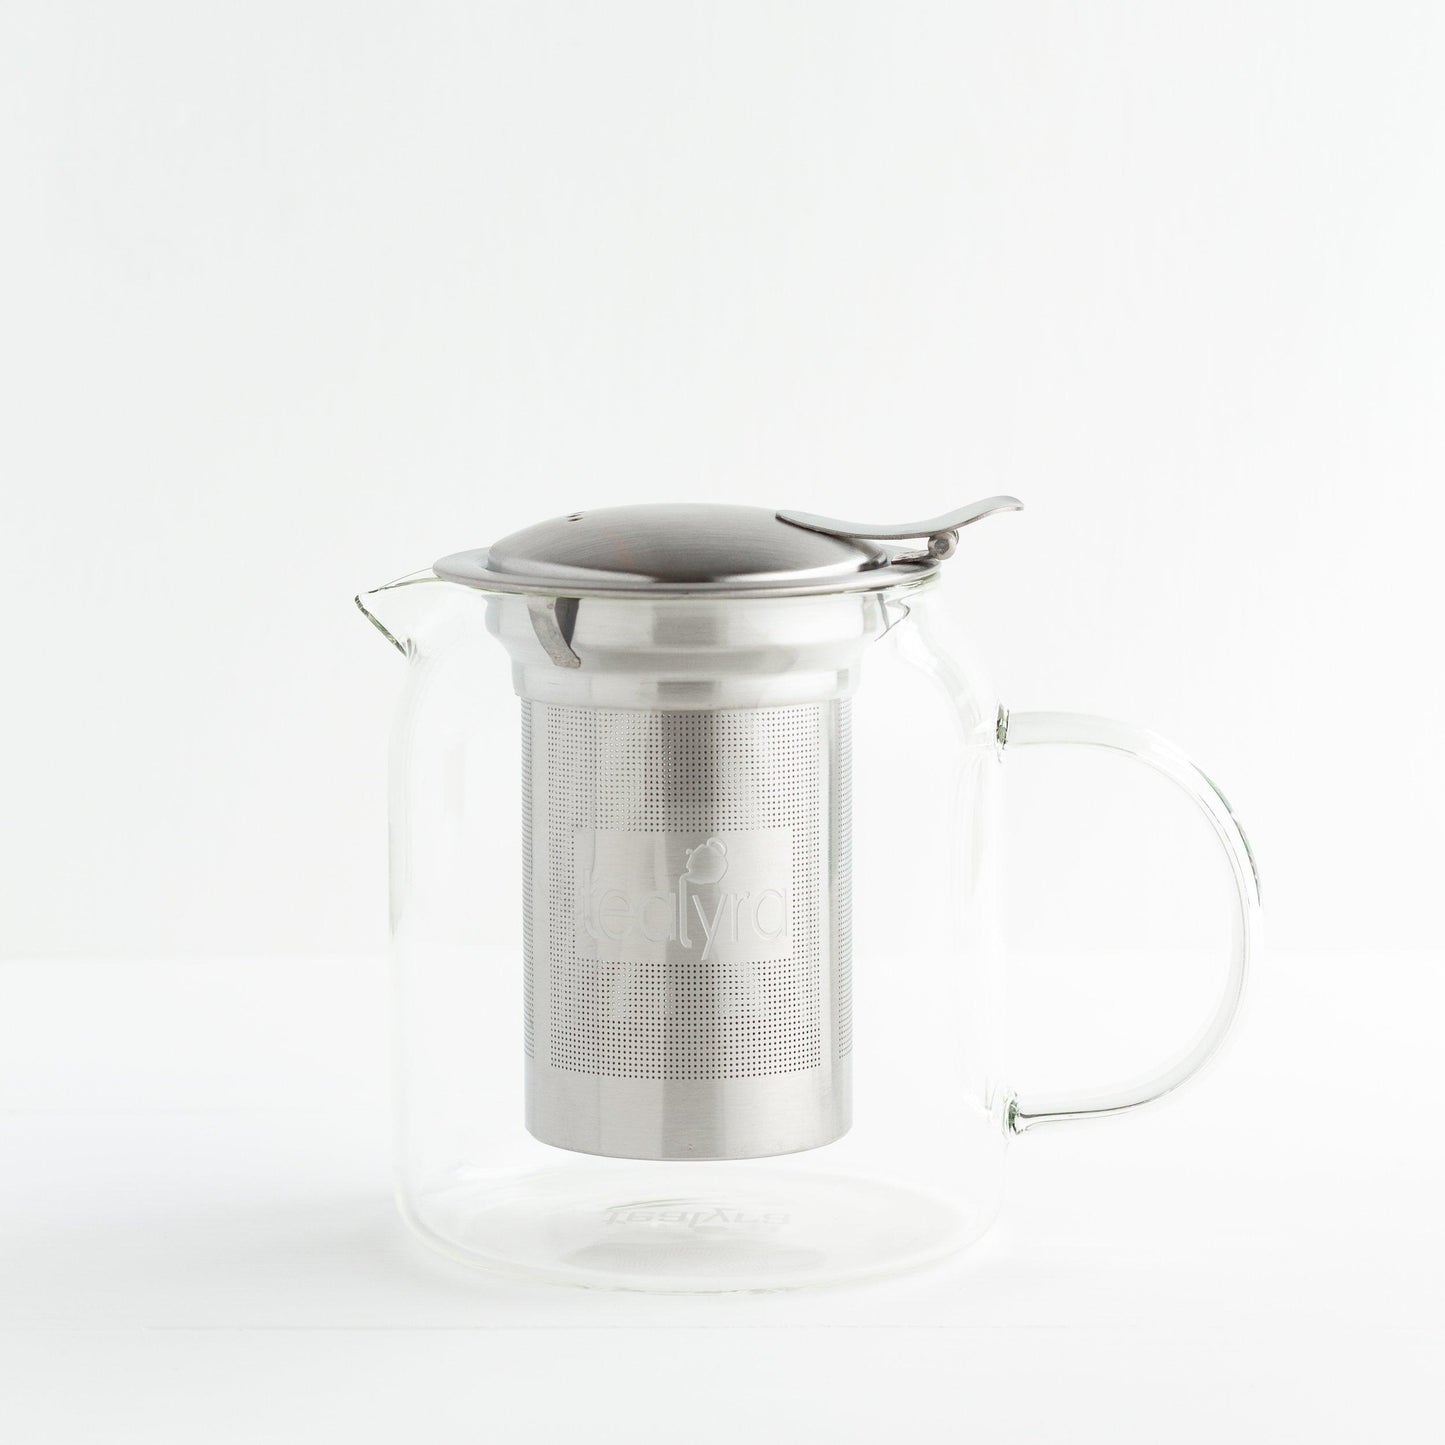 Glass Teapot with Stainless Steel Infuser shown empty.